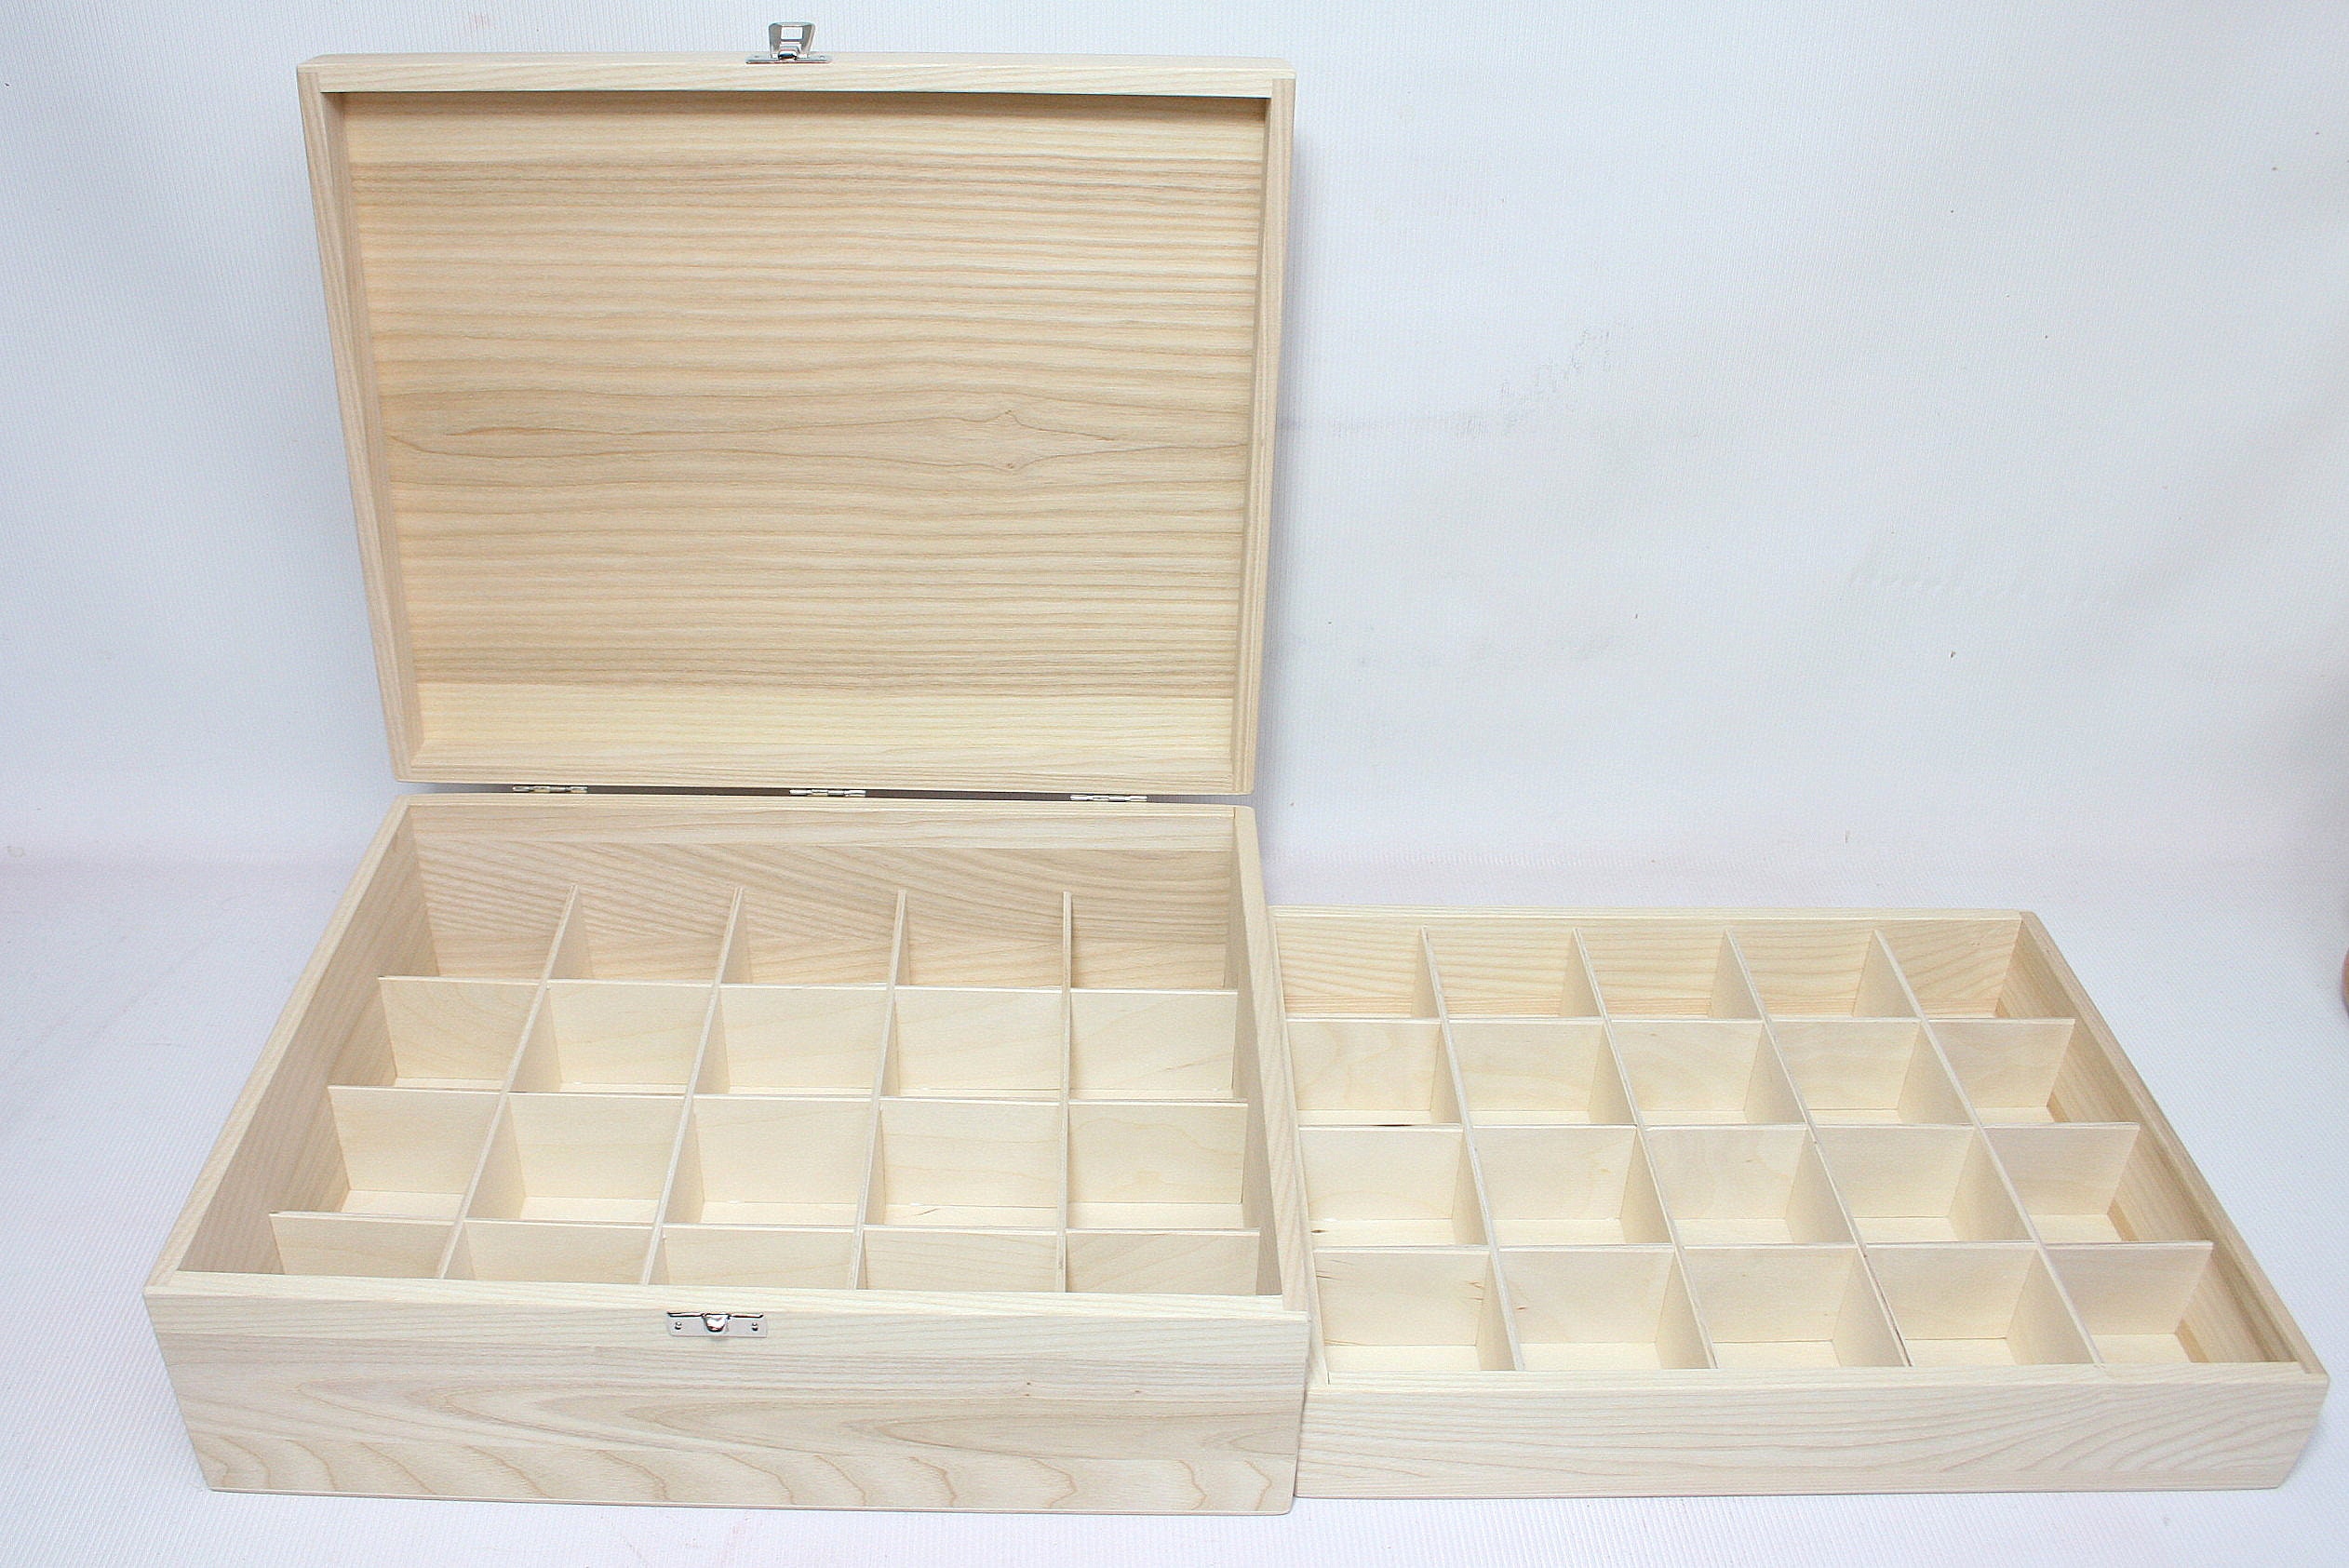 Multi Compartment Wooden Storage Box with Lid Tray Container 20